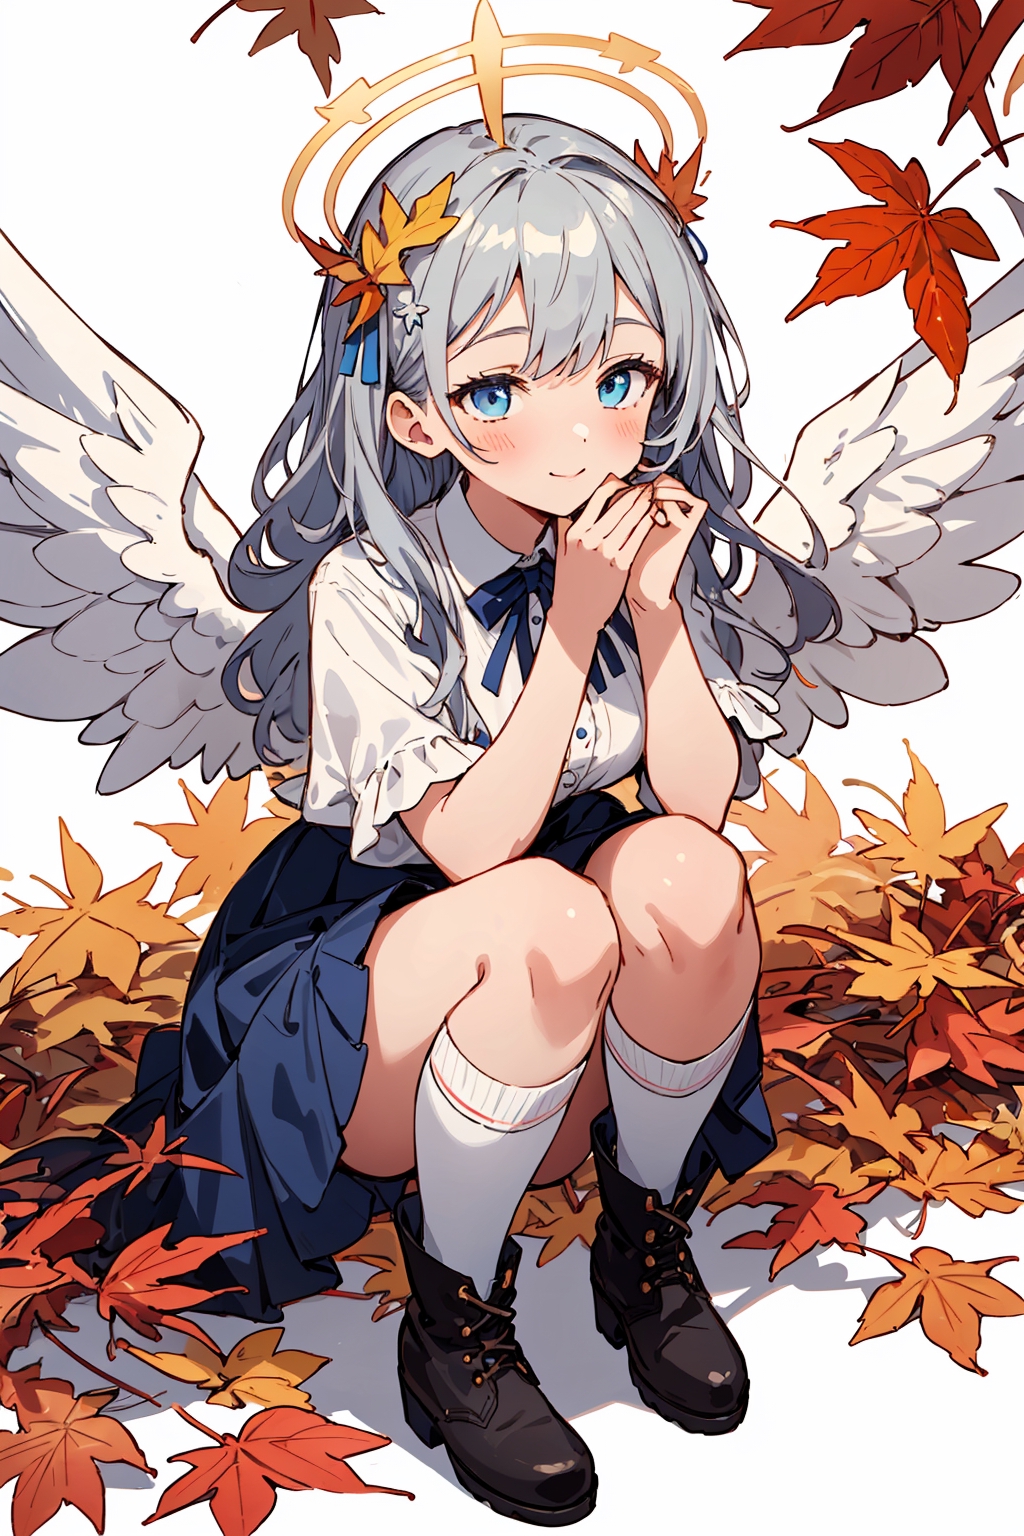 anime angel girl with white hair and blue eyes